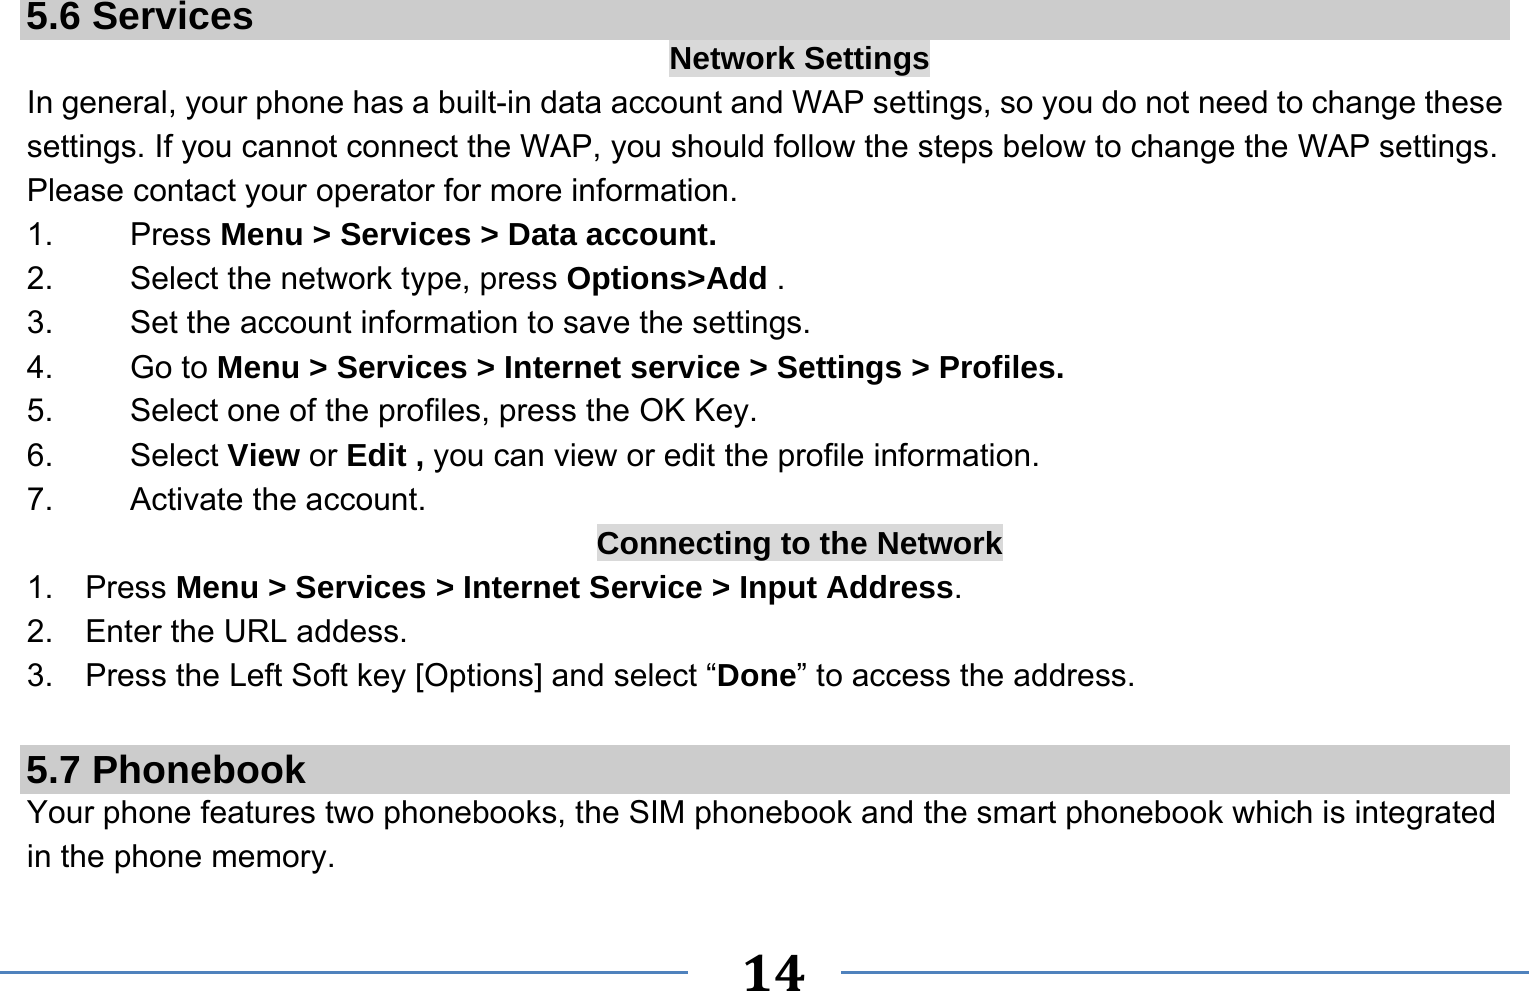   14    5.6 Services  Network Settings In general, your phone has a built-in data account and WAP settings, so you do not need to change these settings. If you cannot connect the WAP, you should follow the steps below to change the WAP settings. Please contact your operator for more information. 1.   Press Menu &gt; Services &gt; Data account. 2.    Select the network type, press Options&gt;Add . 3.    Set the account information to save the settings. 4.   Go to Menu &gt; Services &gt; Internet service &gt; Settings &gt; Profiles. 5.    Select one of the profiles, press the OK Key. 6.   Select View or Edit , you can view or edit the profile information. 7.   Activate the account. Connecting to the Network 1.  Press Menu &gt; Services &gt; Internet Service &gt; Input Address. 2.  Enter the URL addess. 3.  Press the Left Soft key [Options] and select “Done” to access the address.  5.7 Phonebook Your phone features two phonebooks, the SIM phonebook and the smart phonebook which is integrated in the phone memory. 